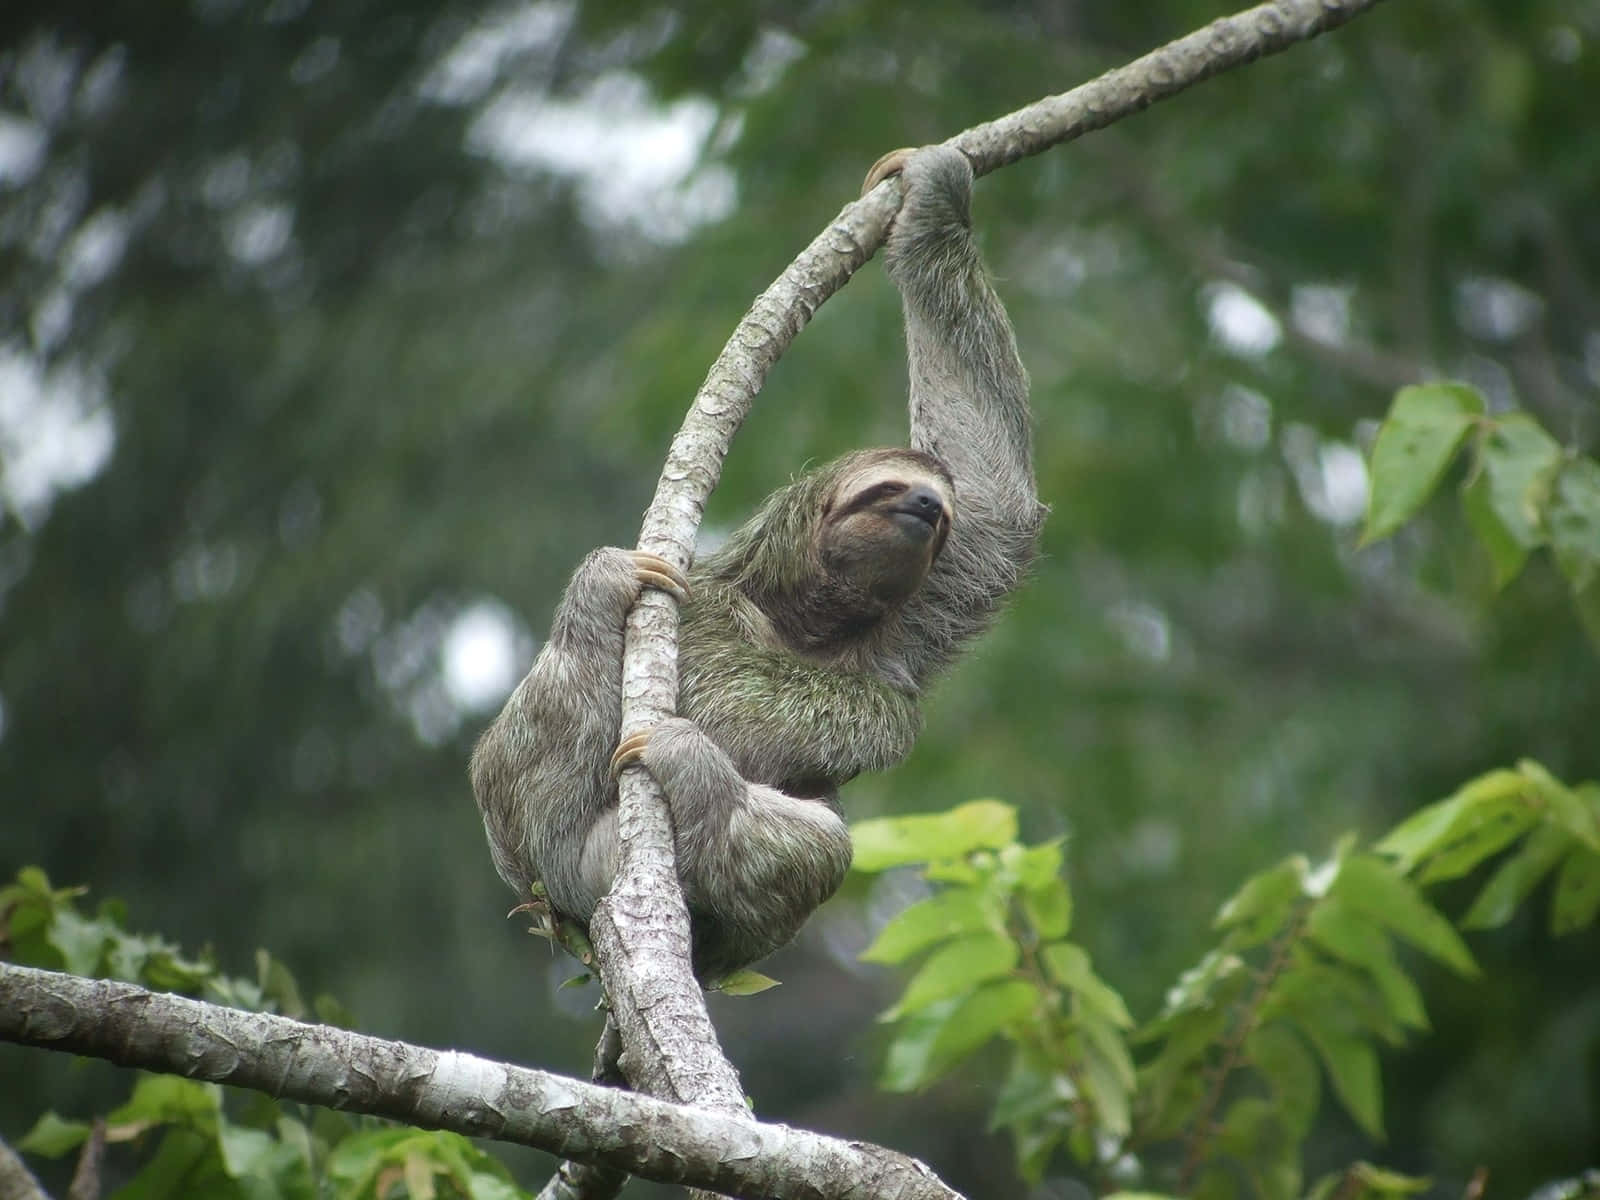 A Relaxed Sloth Hanging On a Tree Branch